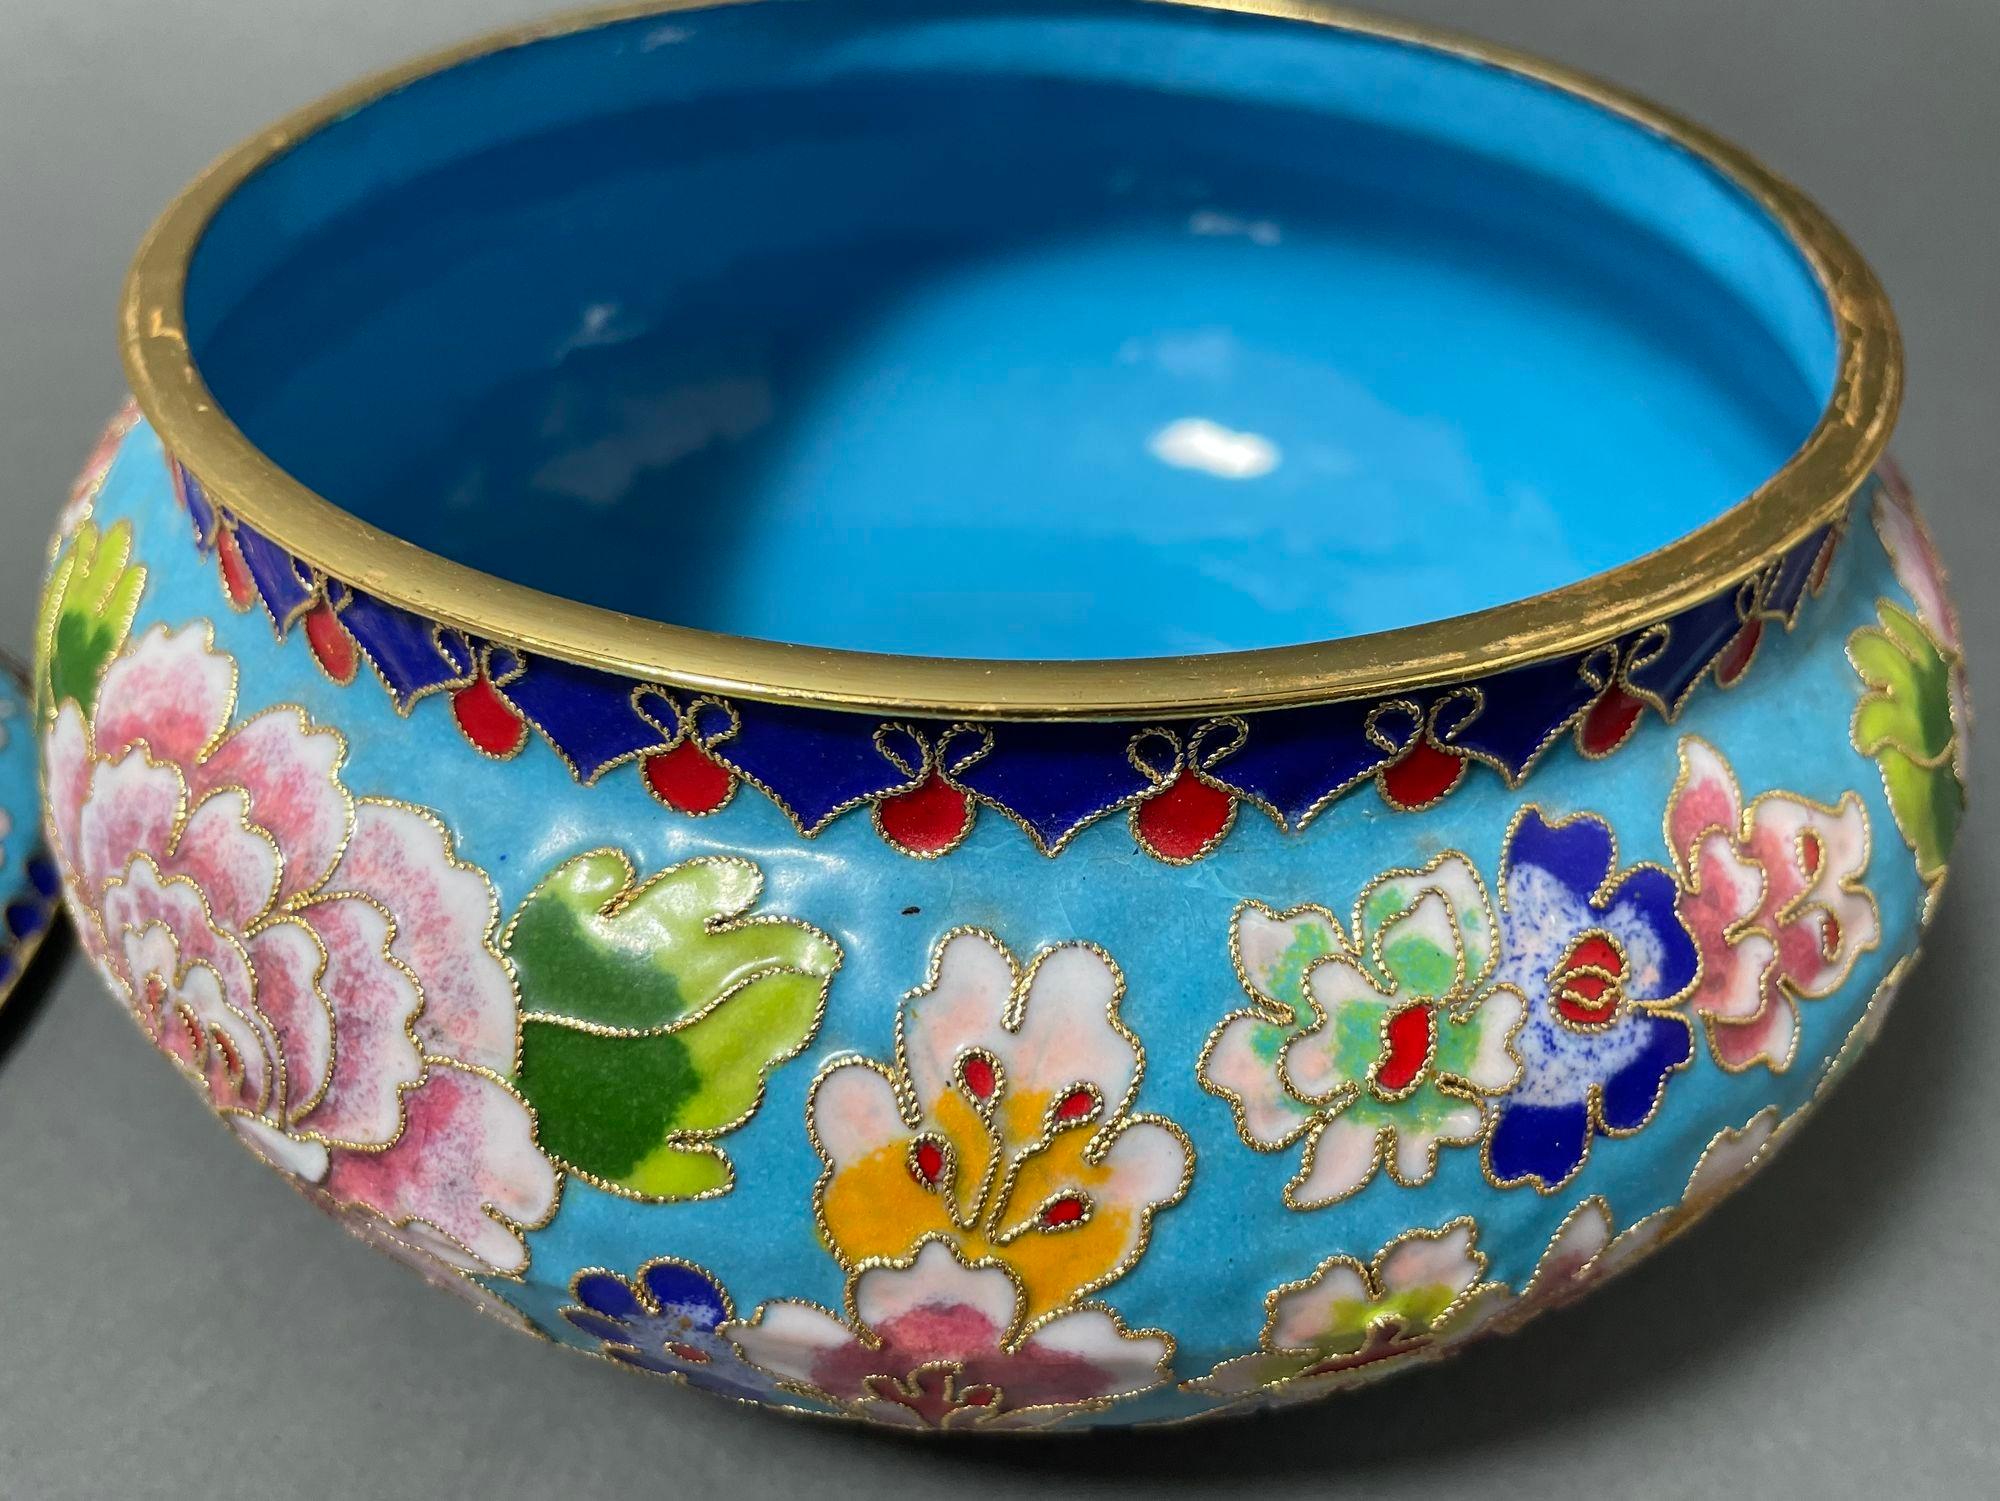 Brass Asian Chinese Cloisone Box with Lid Turquoise Cobalt Pink Colors.